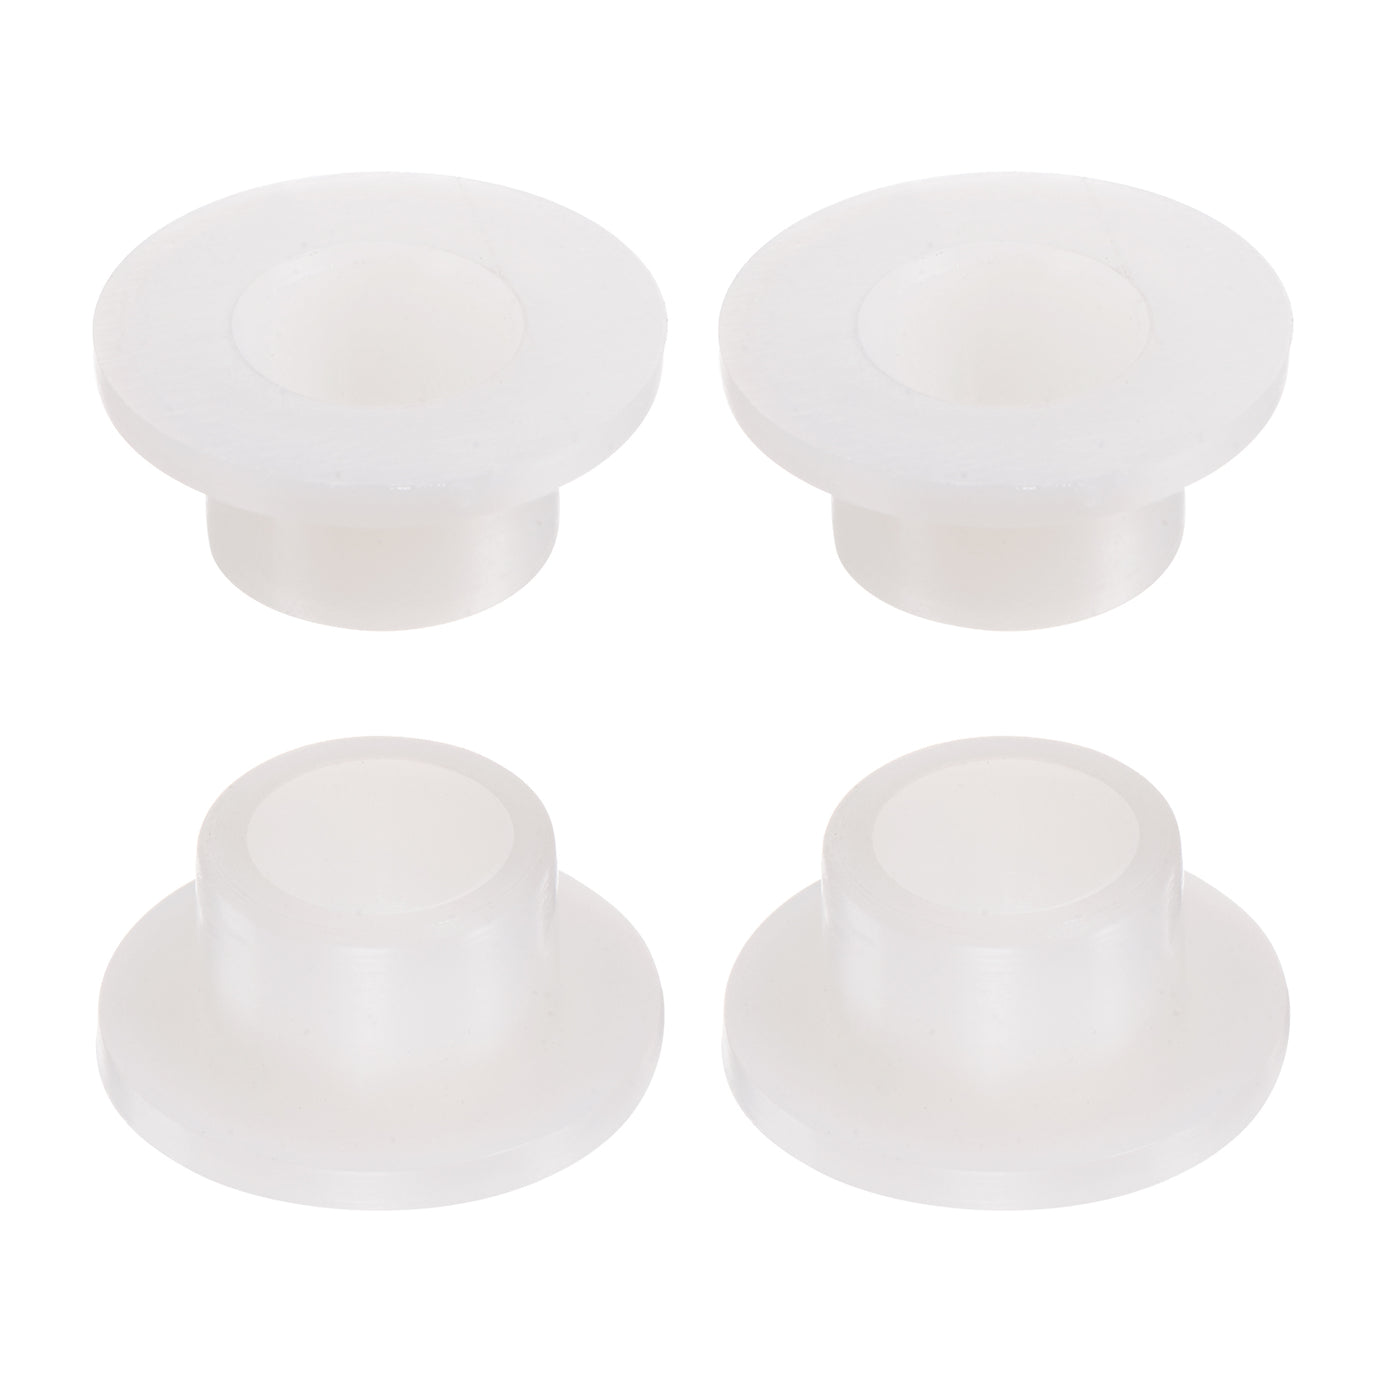 uxcell Uxcell 4pcs Flanged Sleeve Bearings 10.1mm ID 14mm OD 10mm Length Nylon Bushings, White